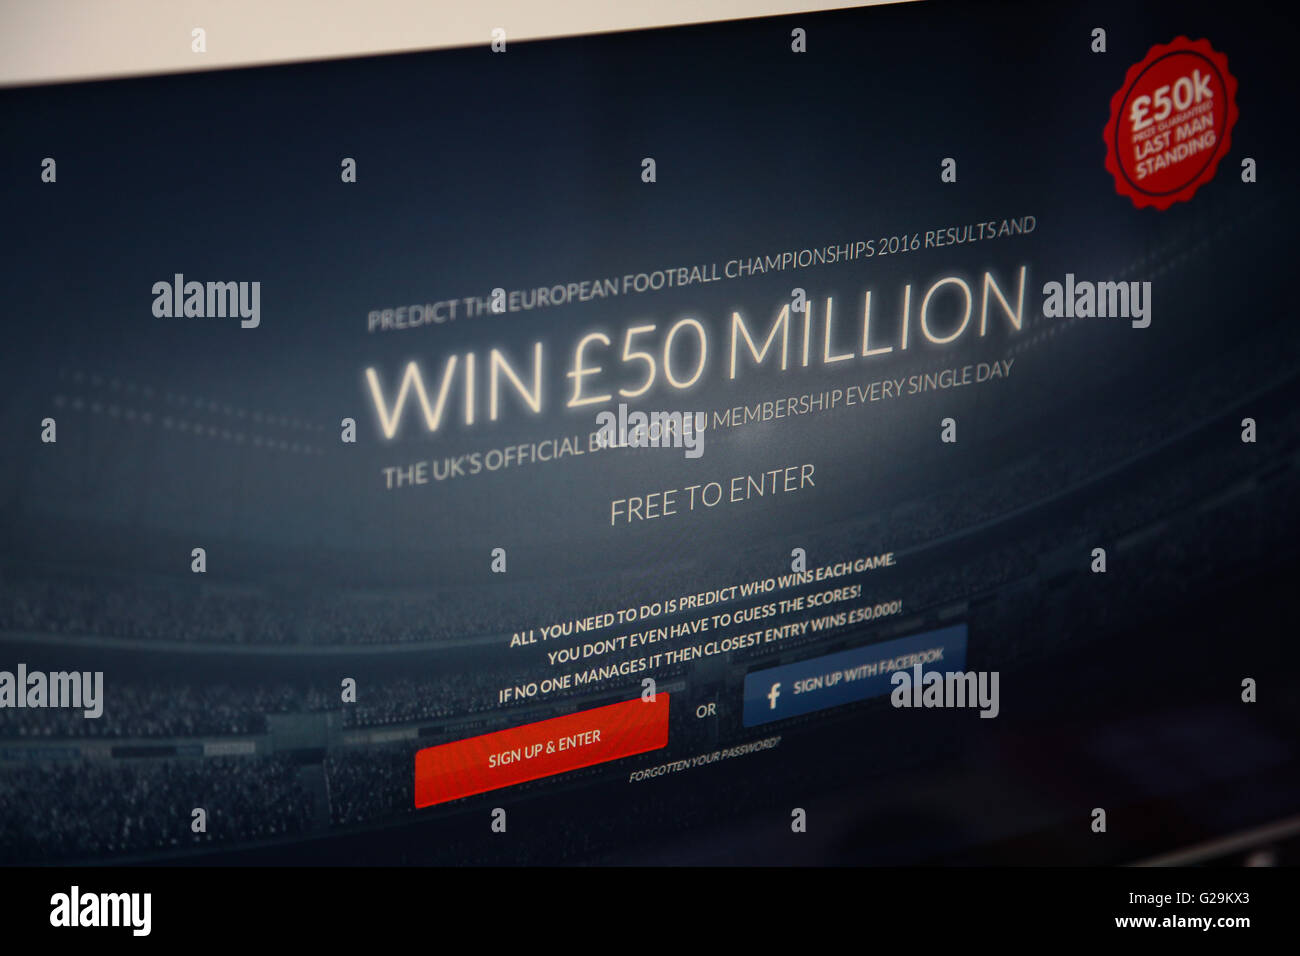 Screenshot of 50million.uk. Vote Leave launches 50million.uk, a competition to win £50 million. Stock Photo